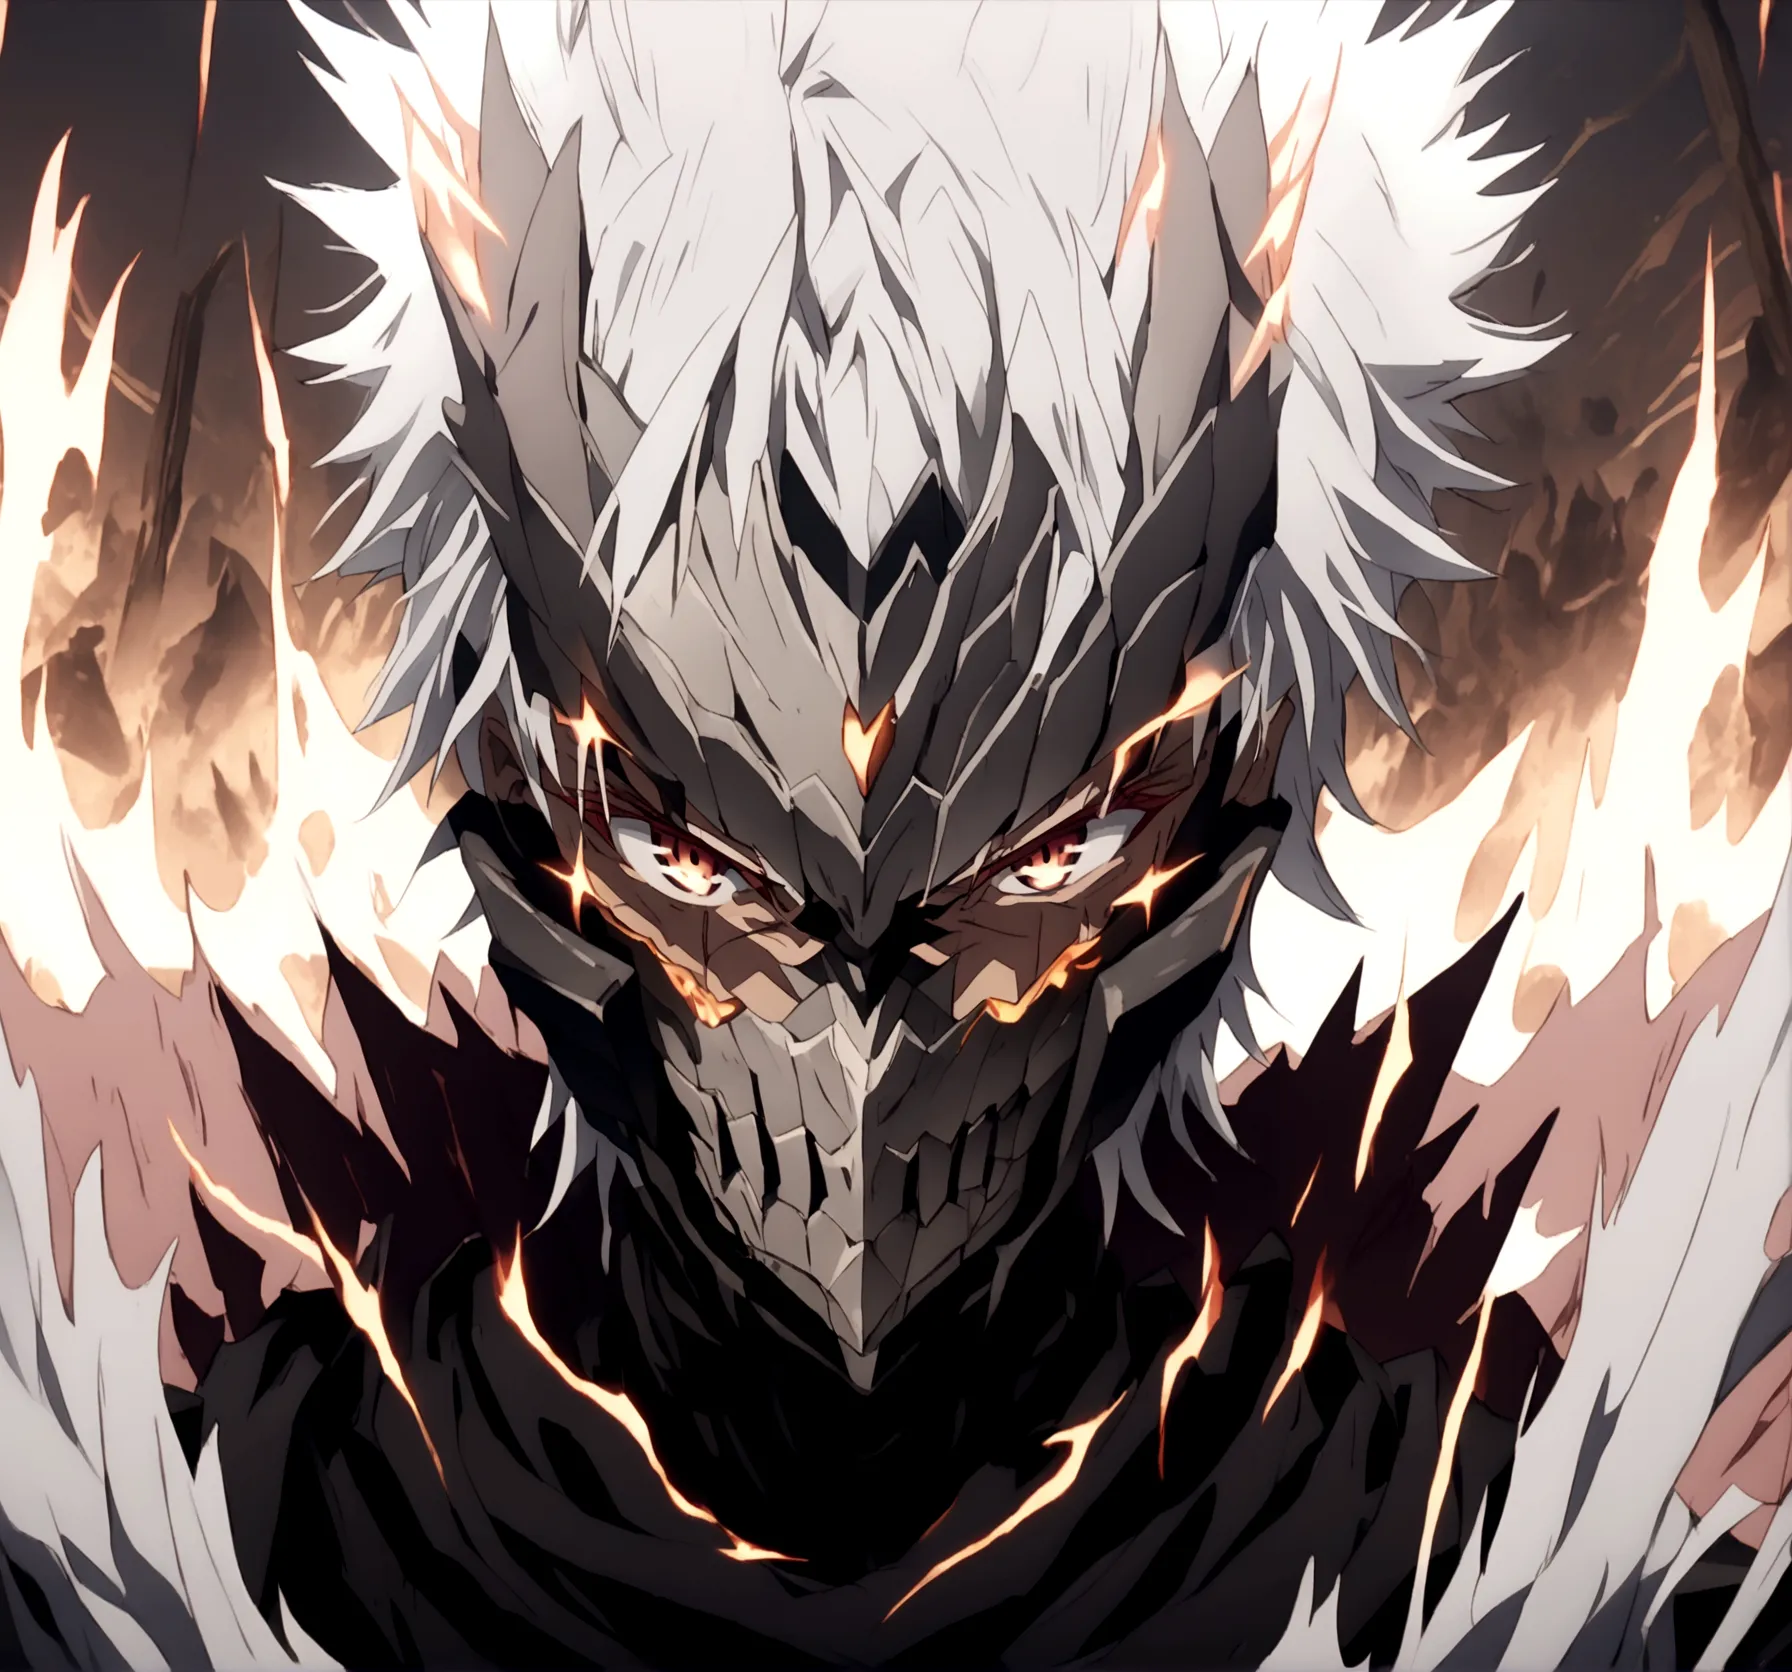 Black armor, white hair, red eyes, white messy spiky hair, black sword, extreme aura, serious face expression, black armored fac...